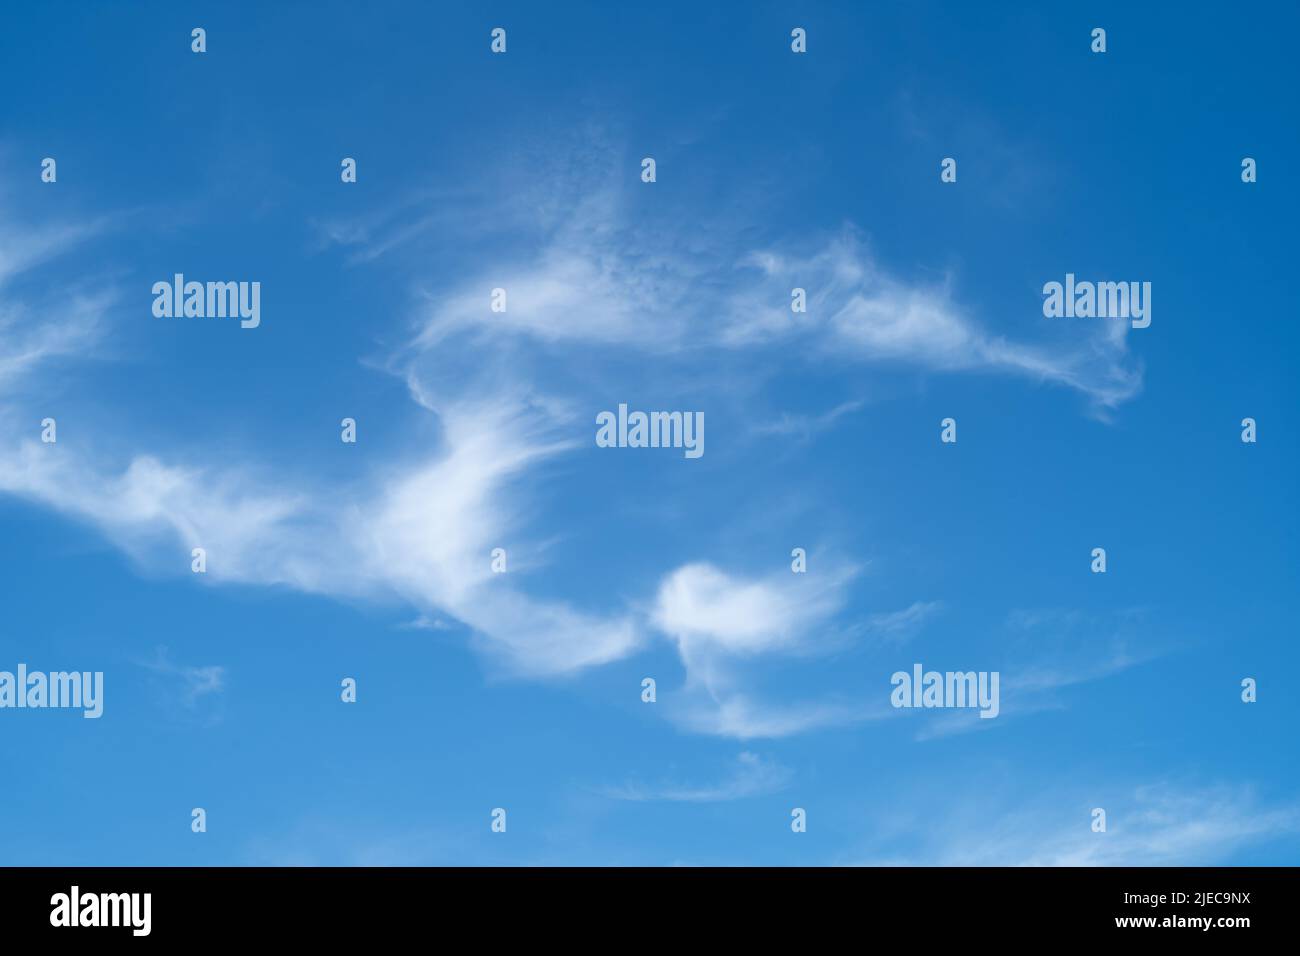 Unusual patterns of wispy clouds against a blue sky on a summer day Stock Photo